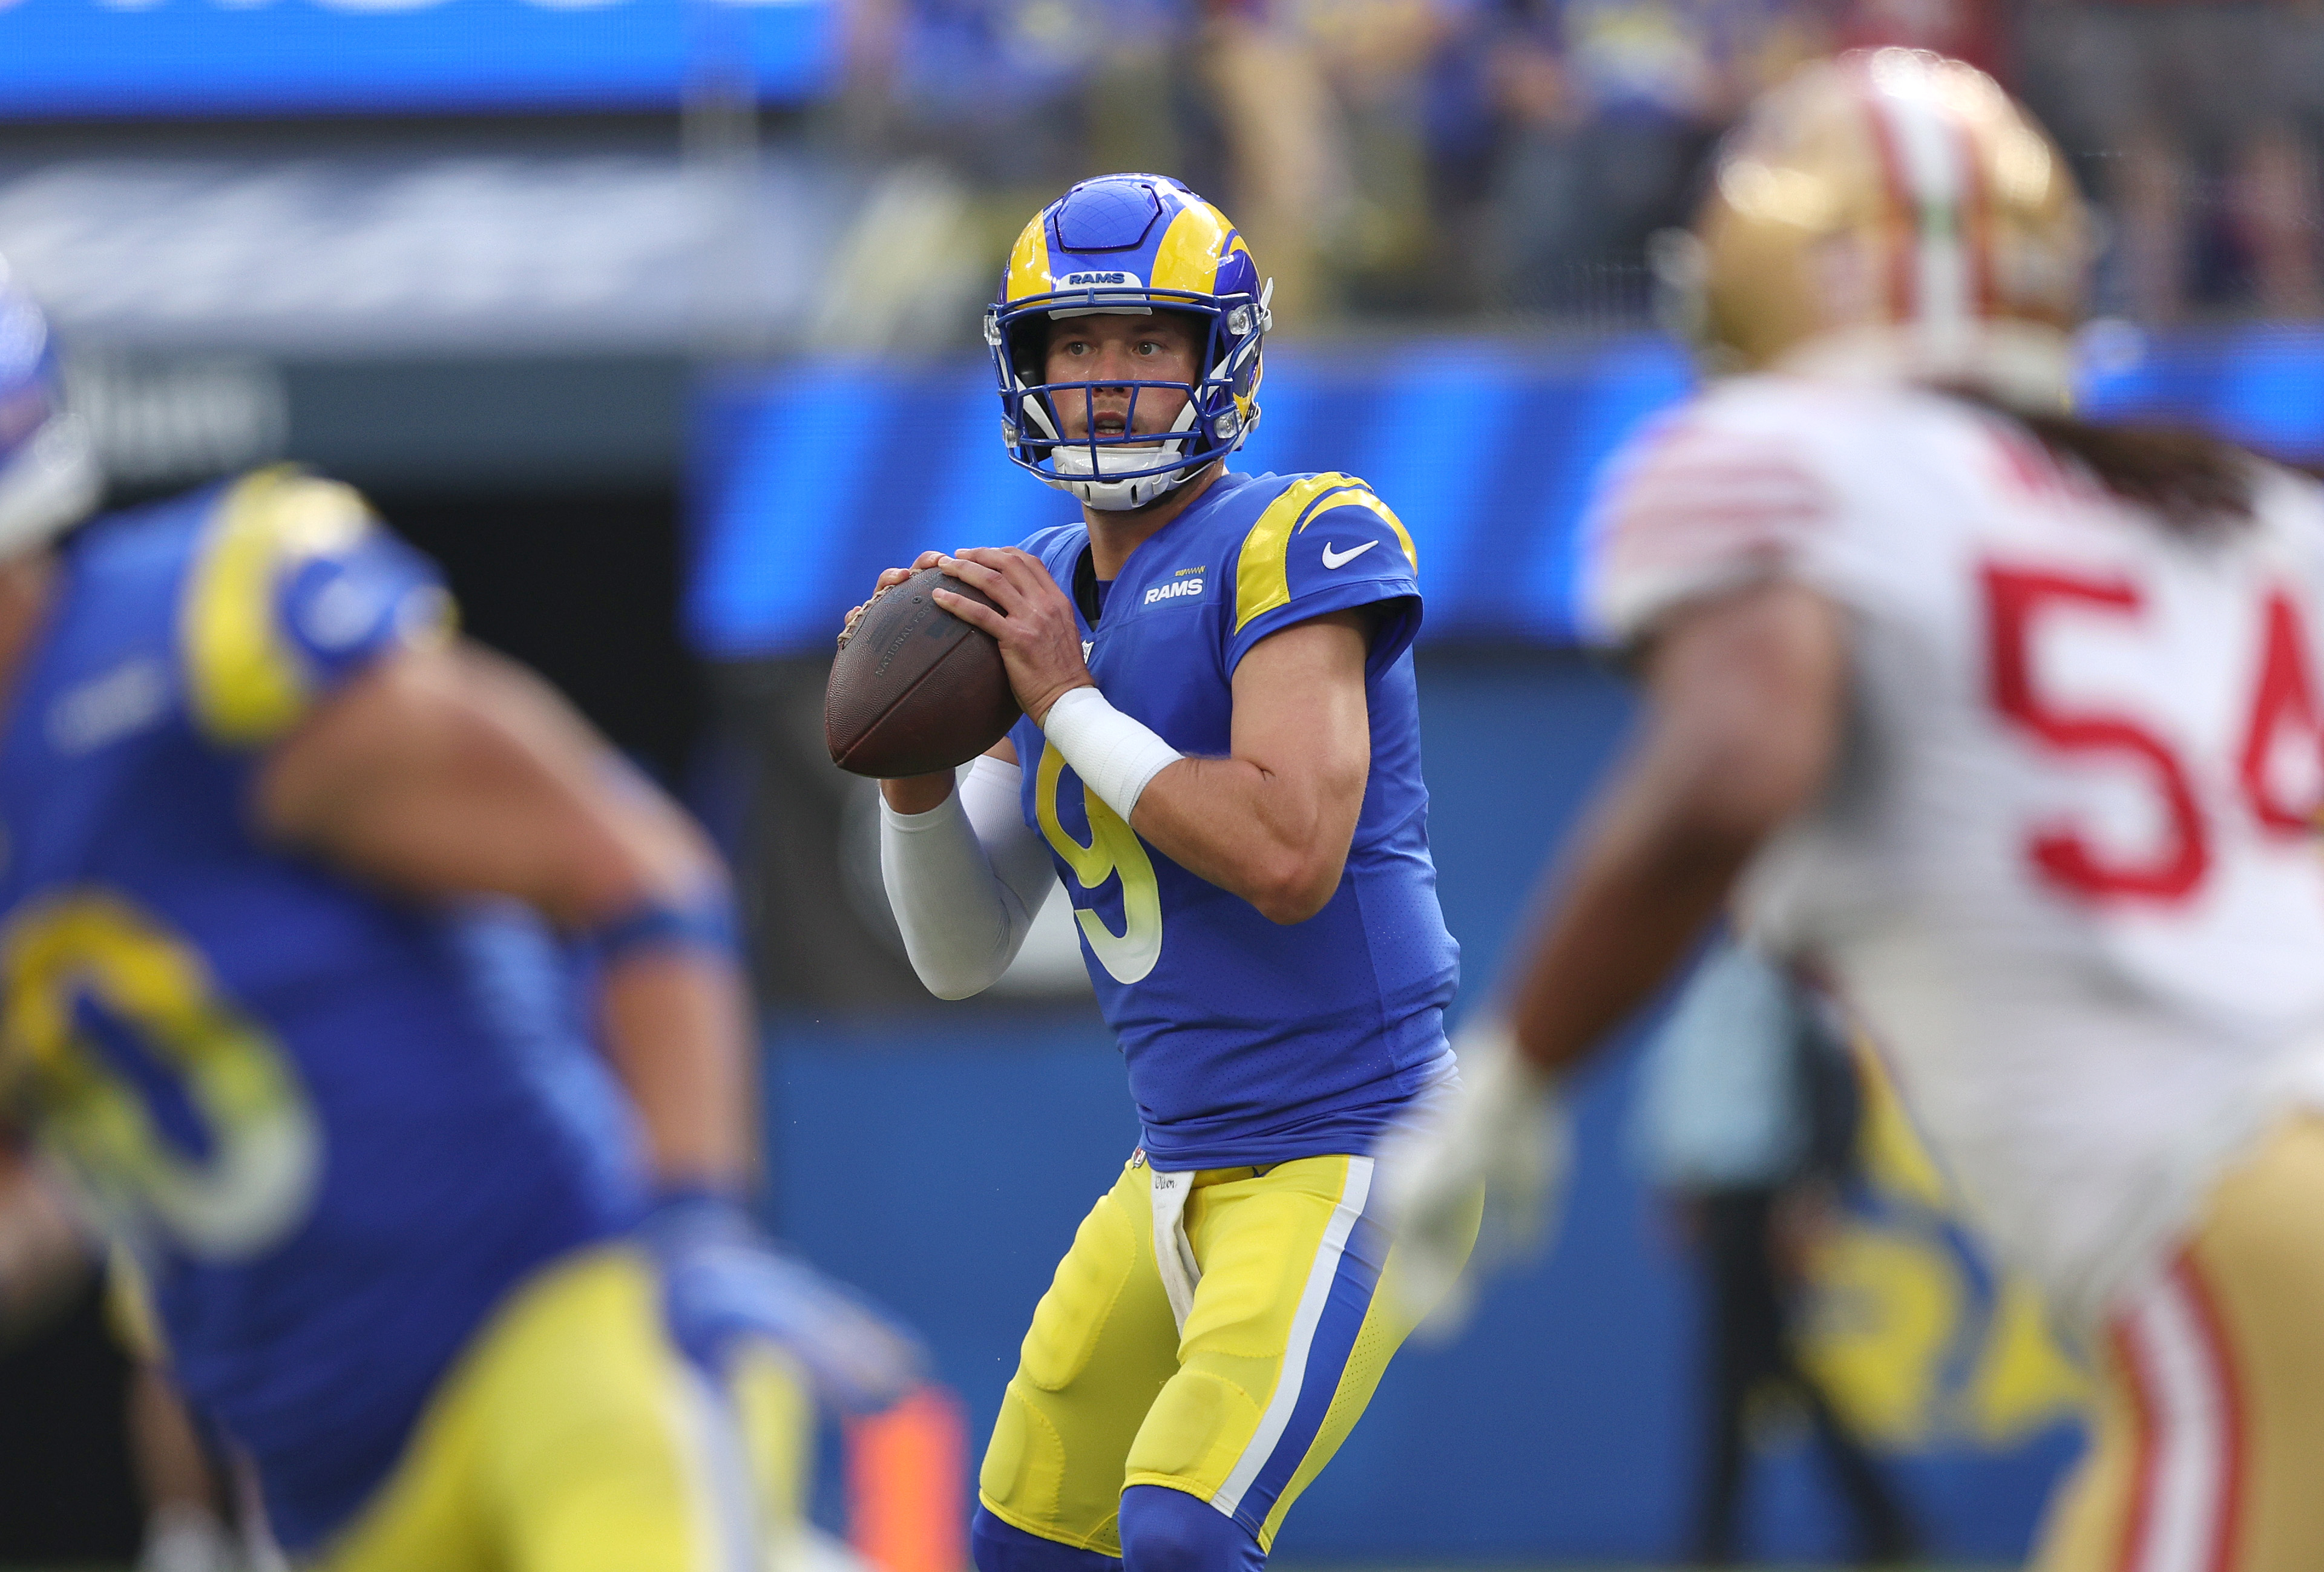 Quarterback Matthew Stafford (#9) of the Los Angeles Rams looks to pass in the game against the San Francisco 49ers at SoFi Stadium in Inglewood, California, October 30, 2022. /CFP